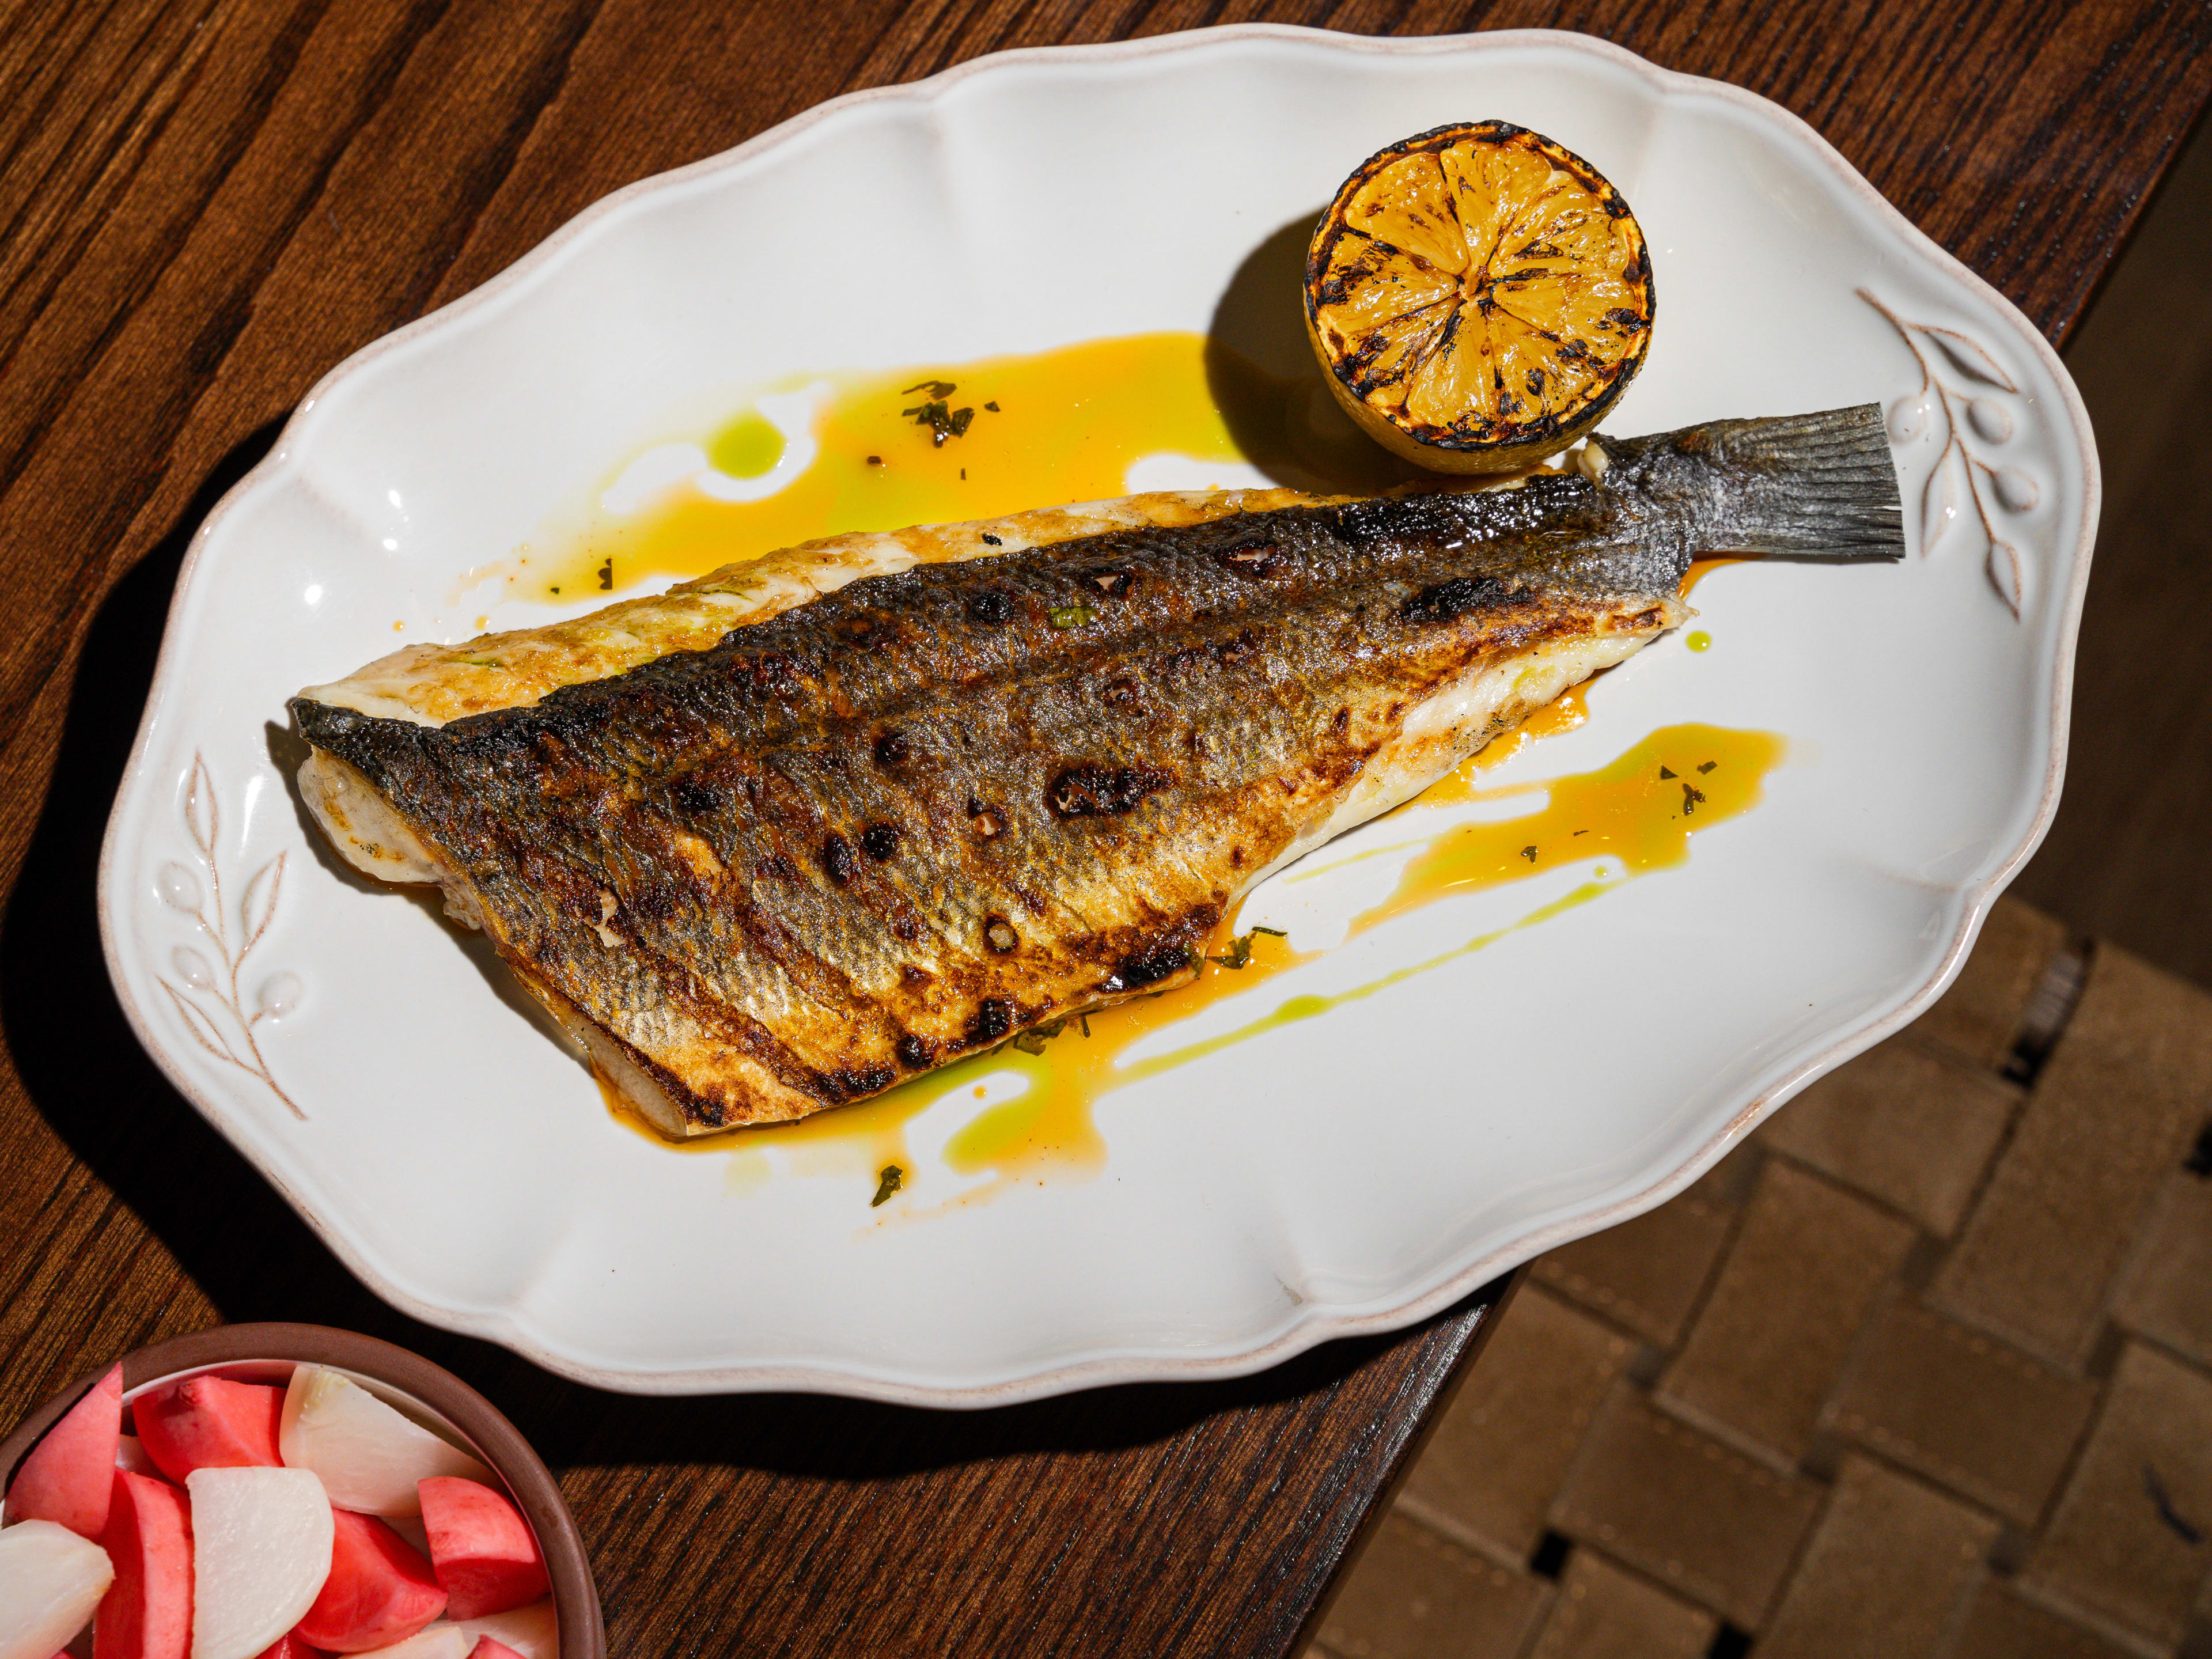 Plate with a whole grilled sea bass with half a grilled lemon